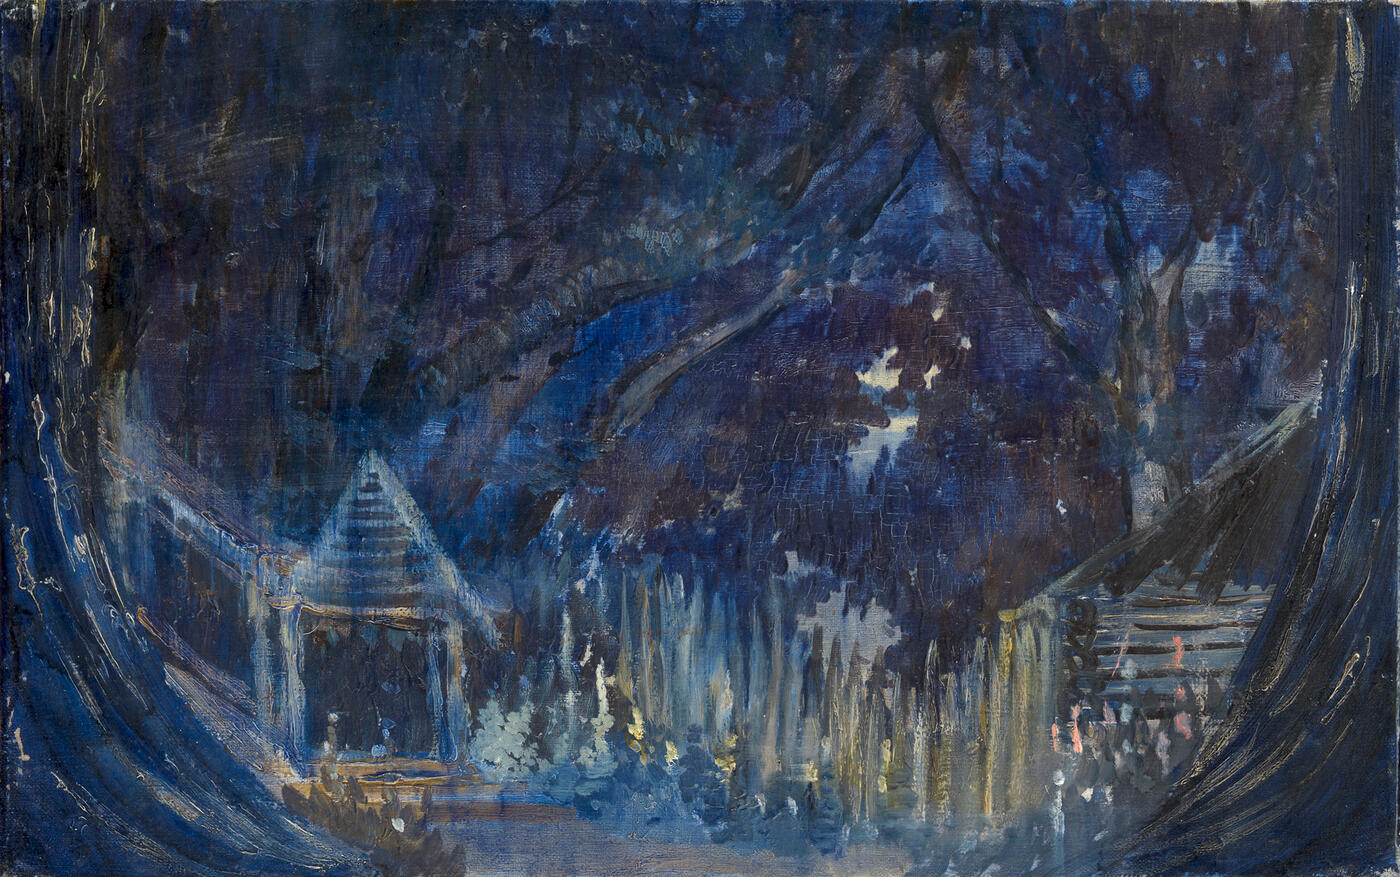 Huts in the Forest, Set Design for the Boris Lavrenev Play "Pesn o chernomortsakh"